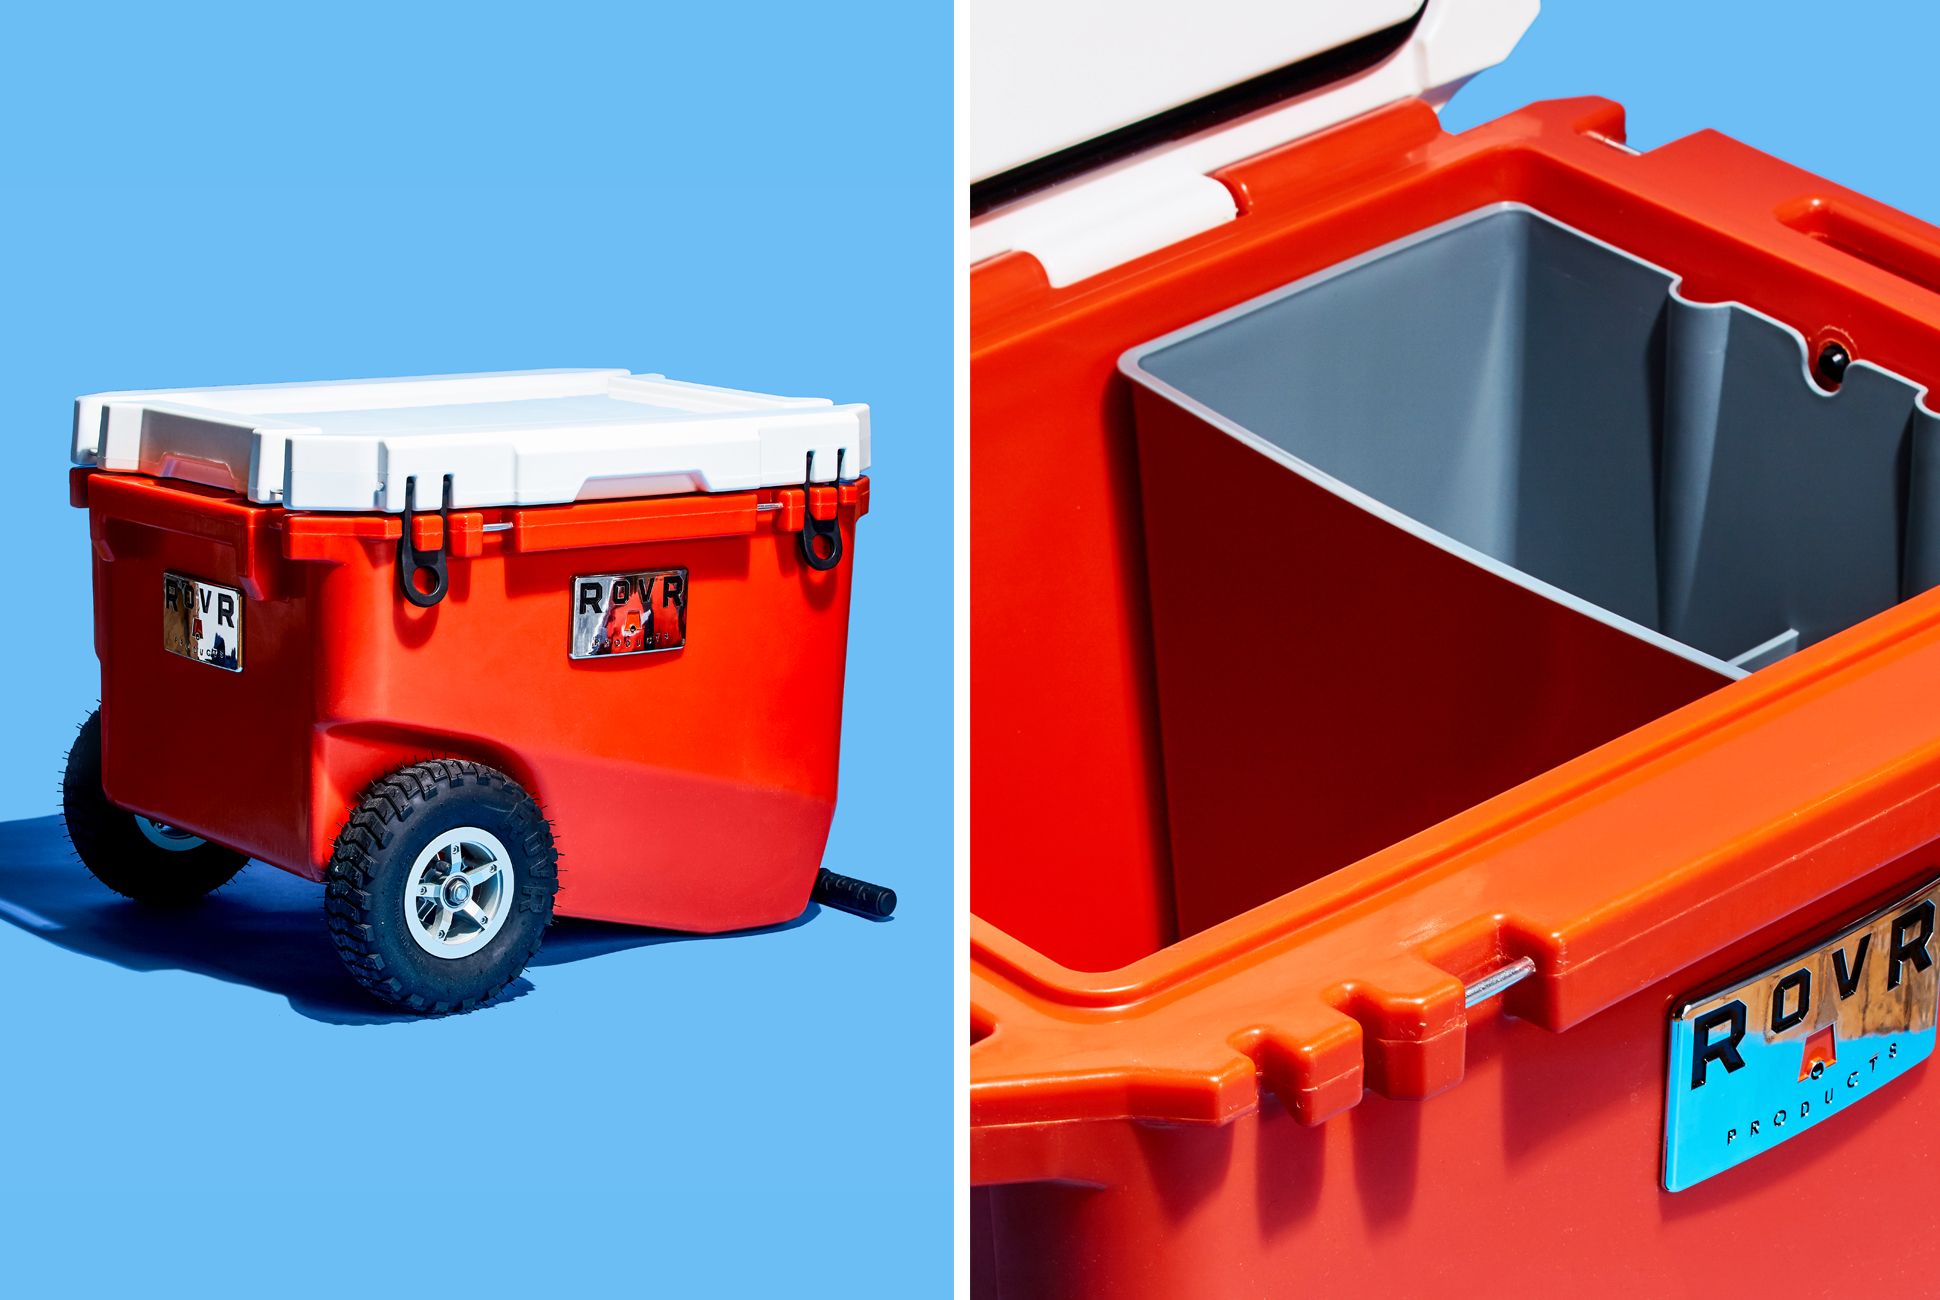 best coolers